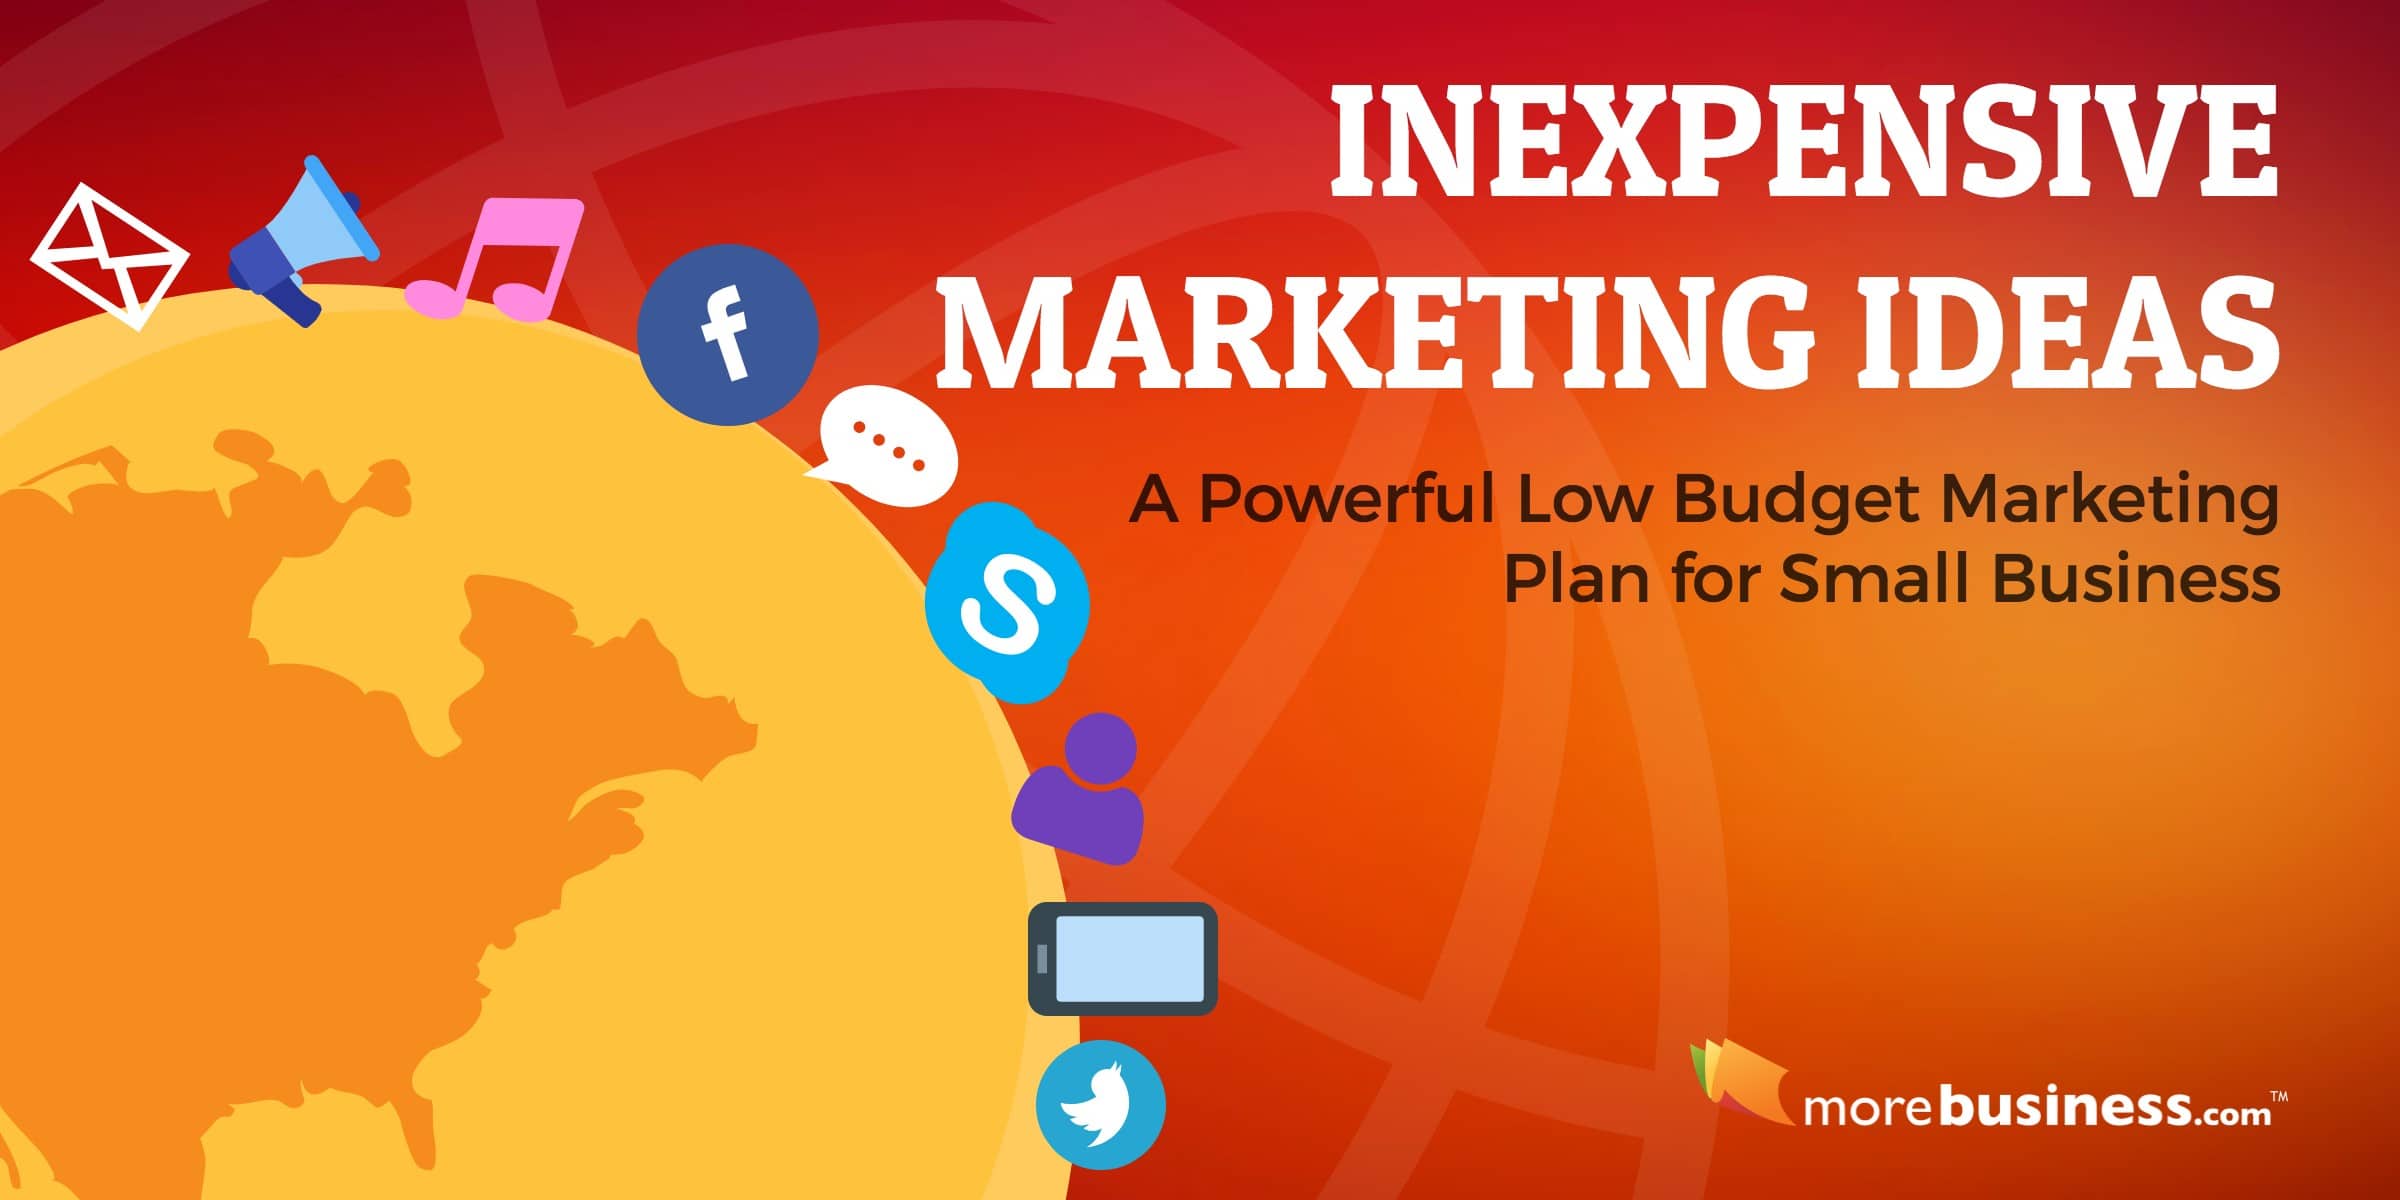 inexpensive marketing ideas for small business - low budget marketing plan